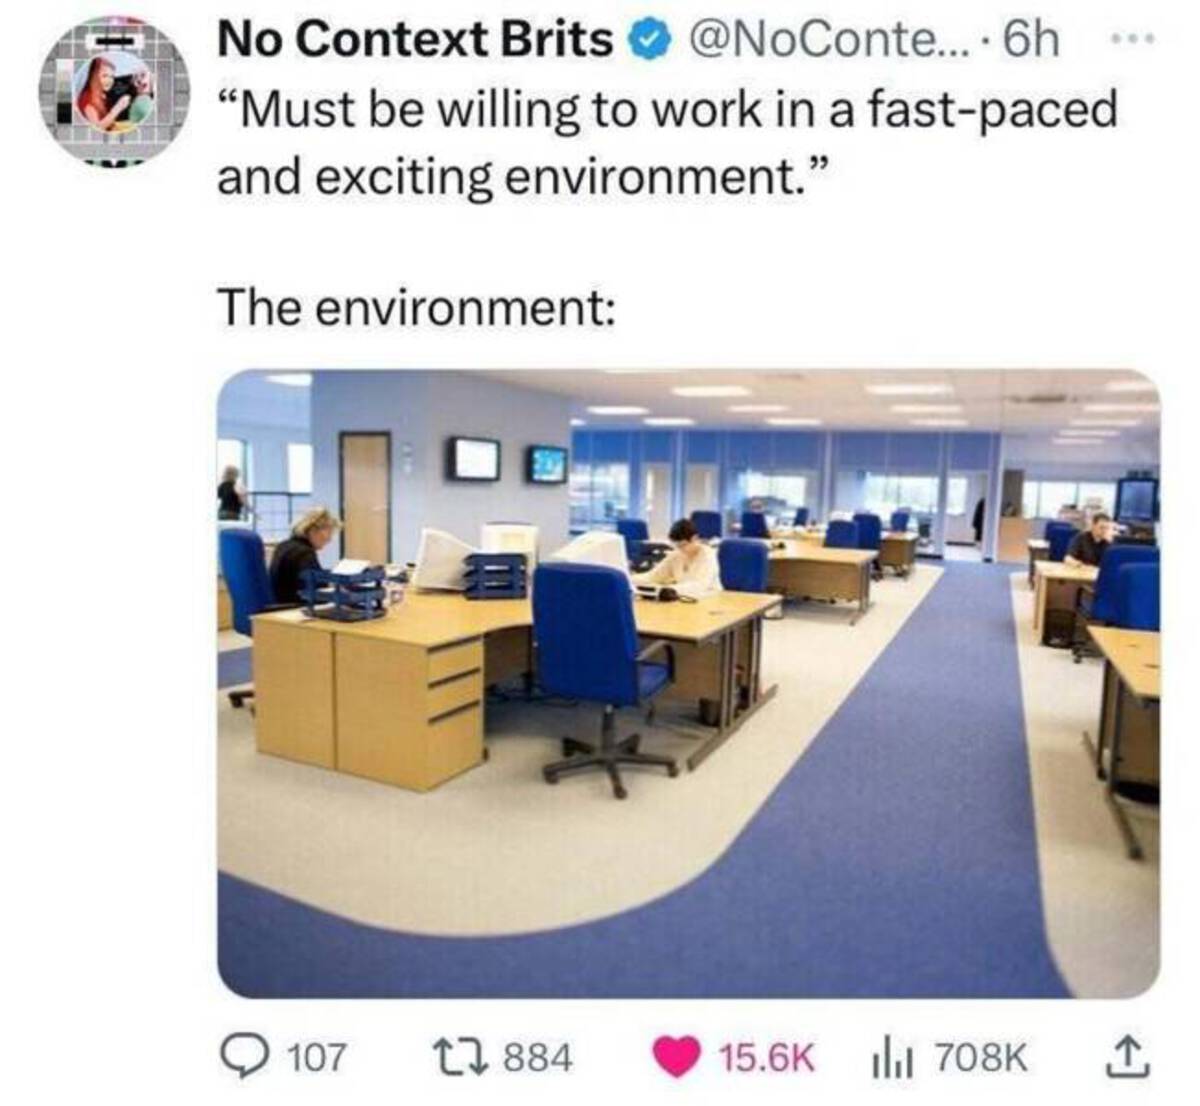 pathway in office - No Context Brits .... 6h "Must be willing to work in a fastpaced and exciting environment." The environment 107 17884